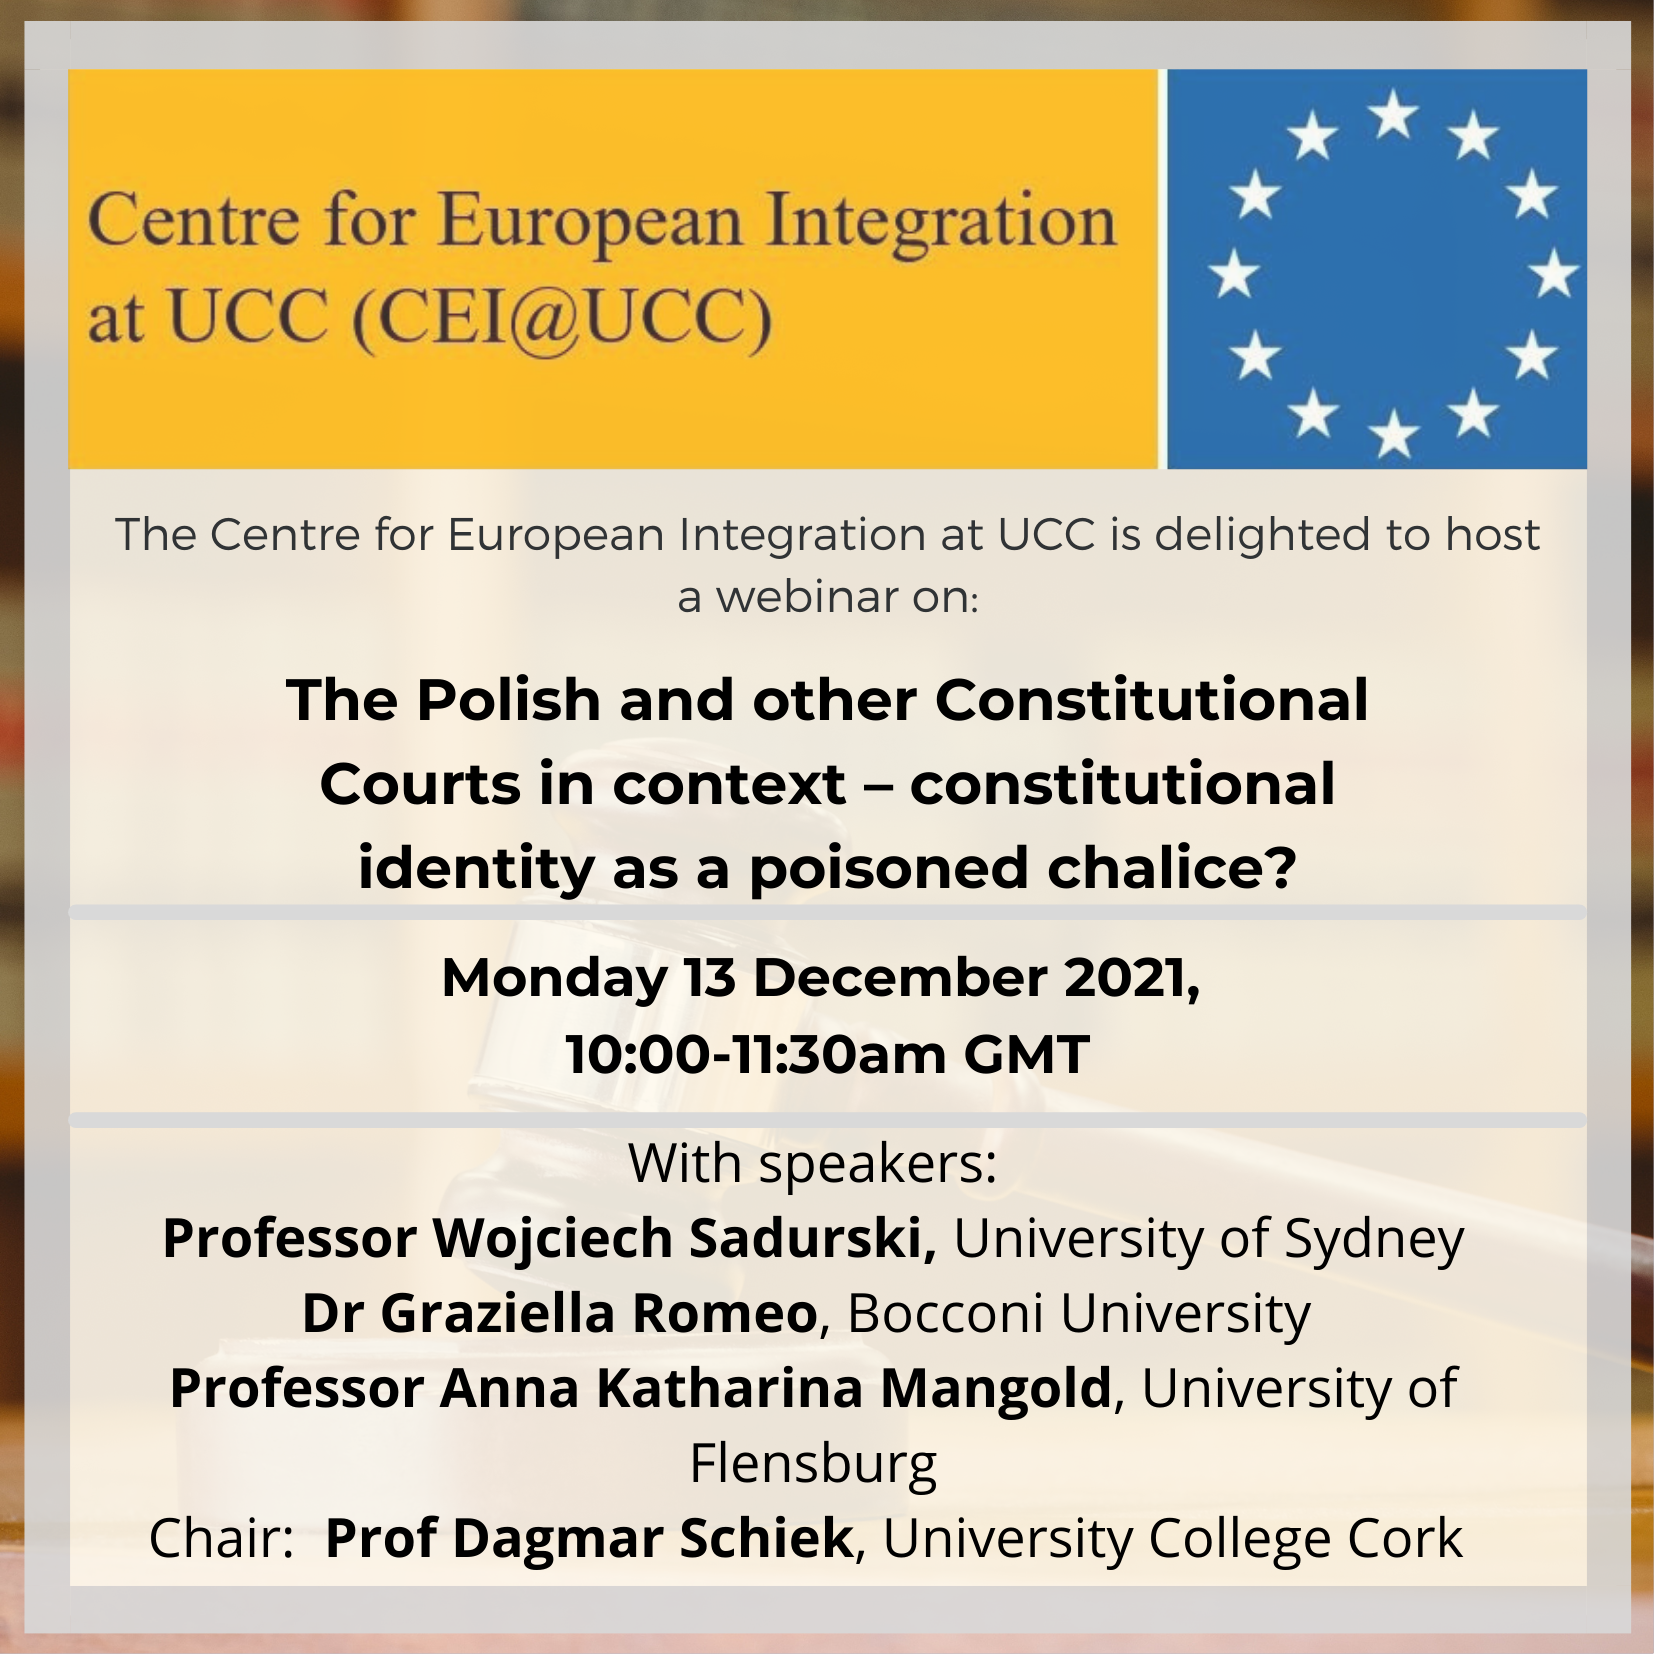 Register Now: “The Polish and other Constitutional Courts in context – constitutional identity as a poisoned chalice?” Webinar